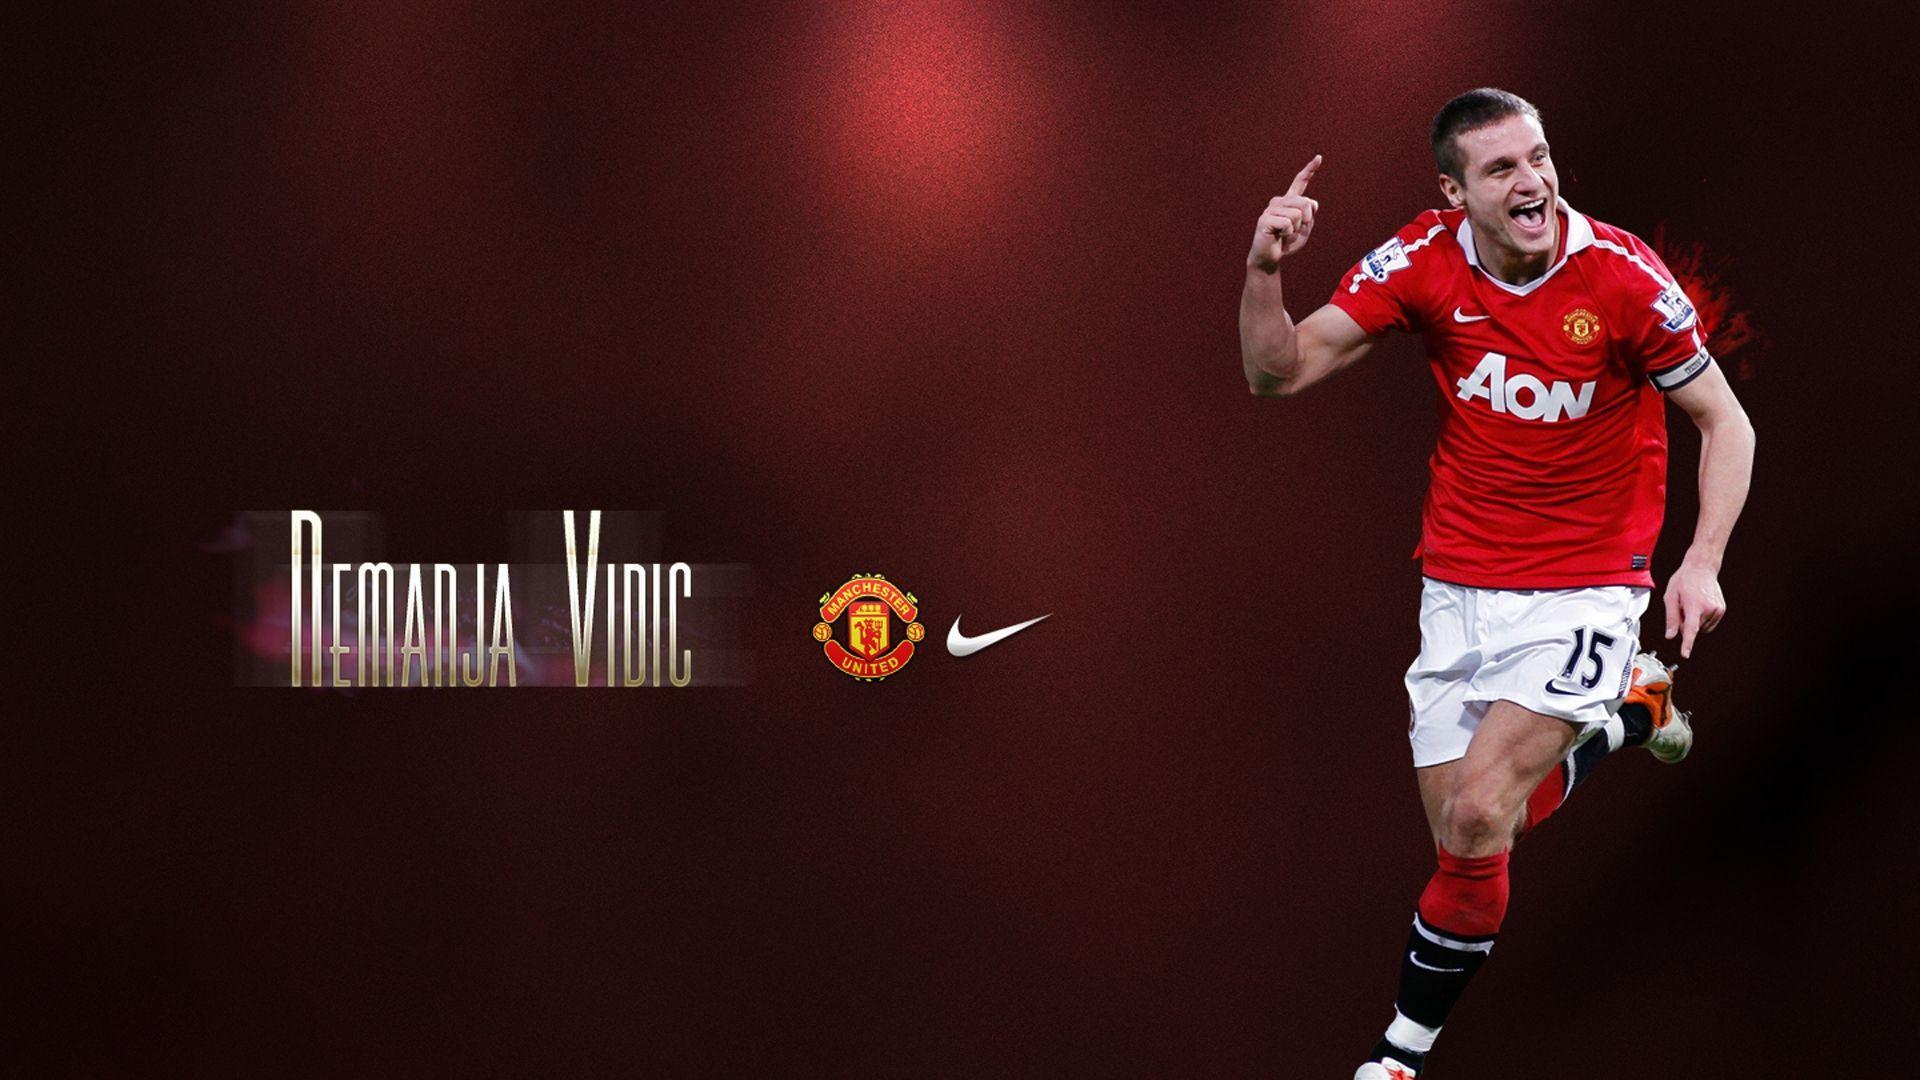 Manchester United Players Wallpapers - Wallpaper Cave